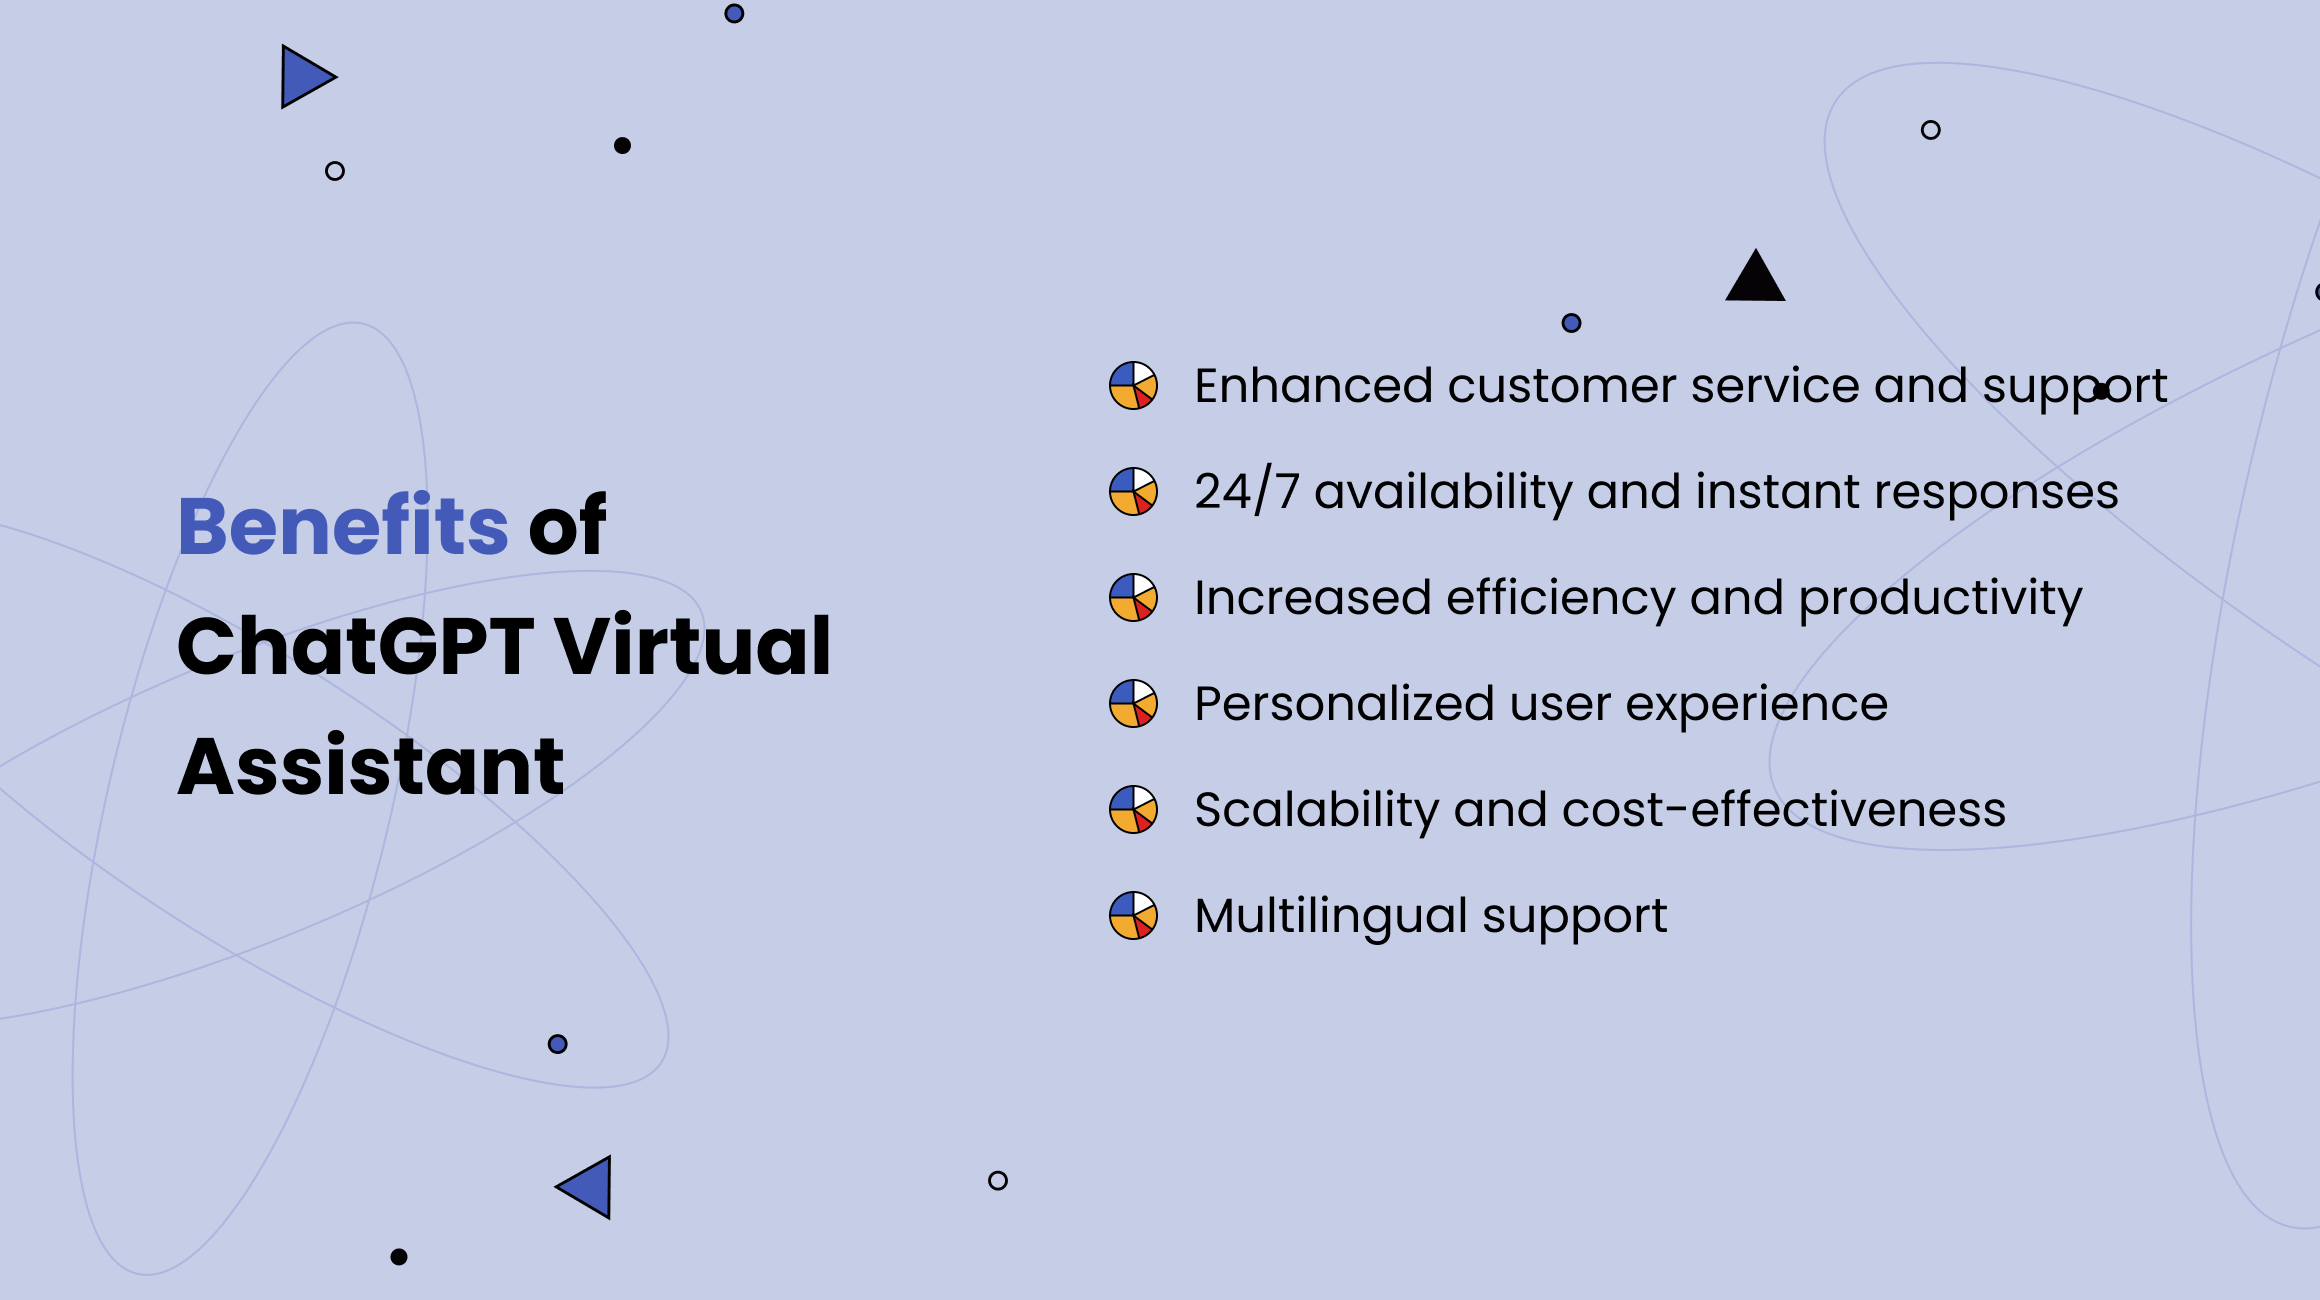 Benefits of ChatGPT Virtual Assistant